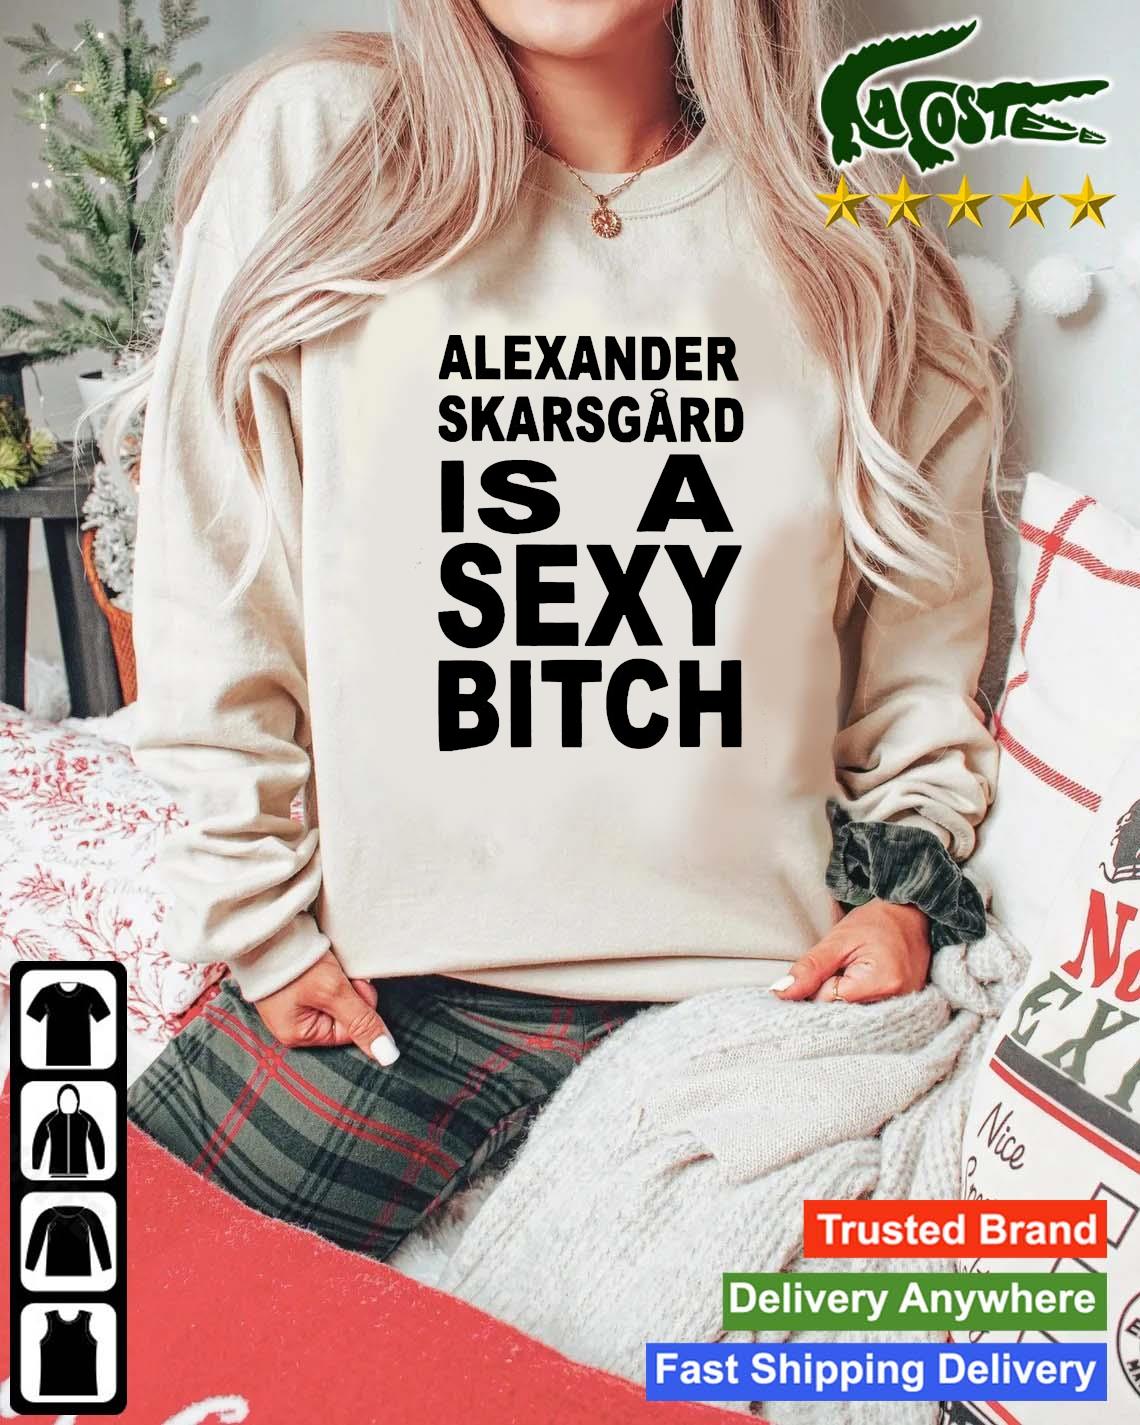 Official Alexander Skarsgard Is A Sexy Bitch Sweats Mockup Sweater